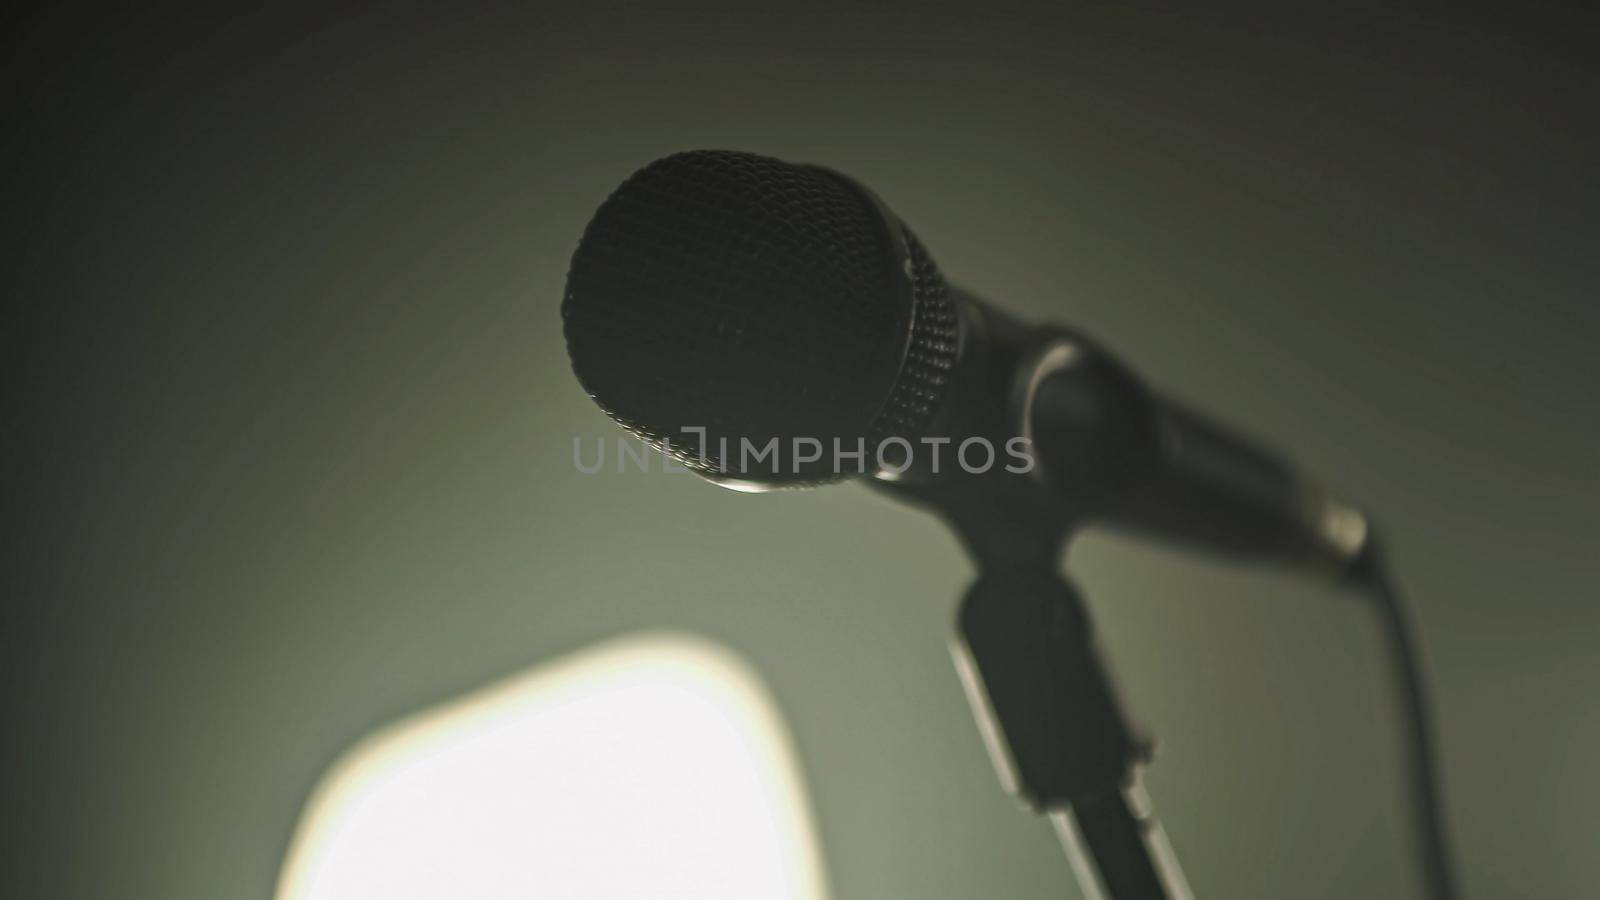 A microphone on stage live by pippocarlot